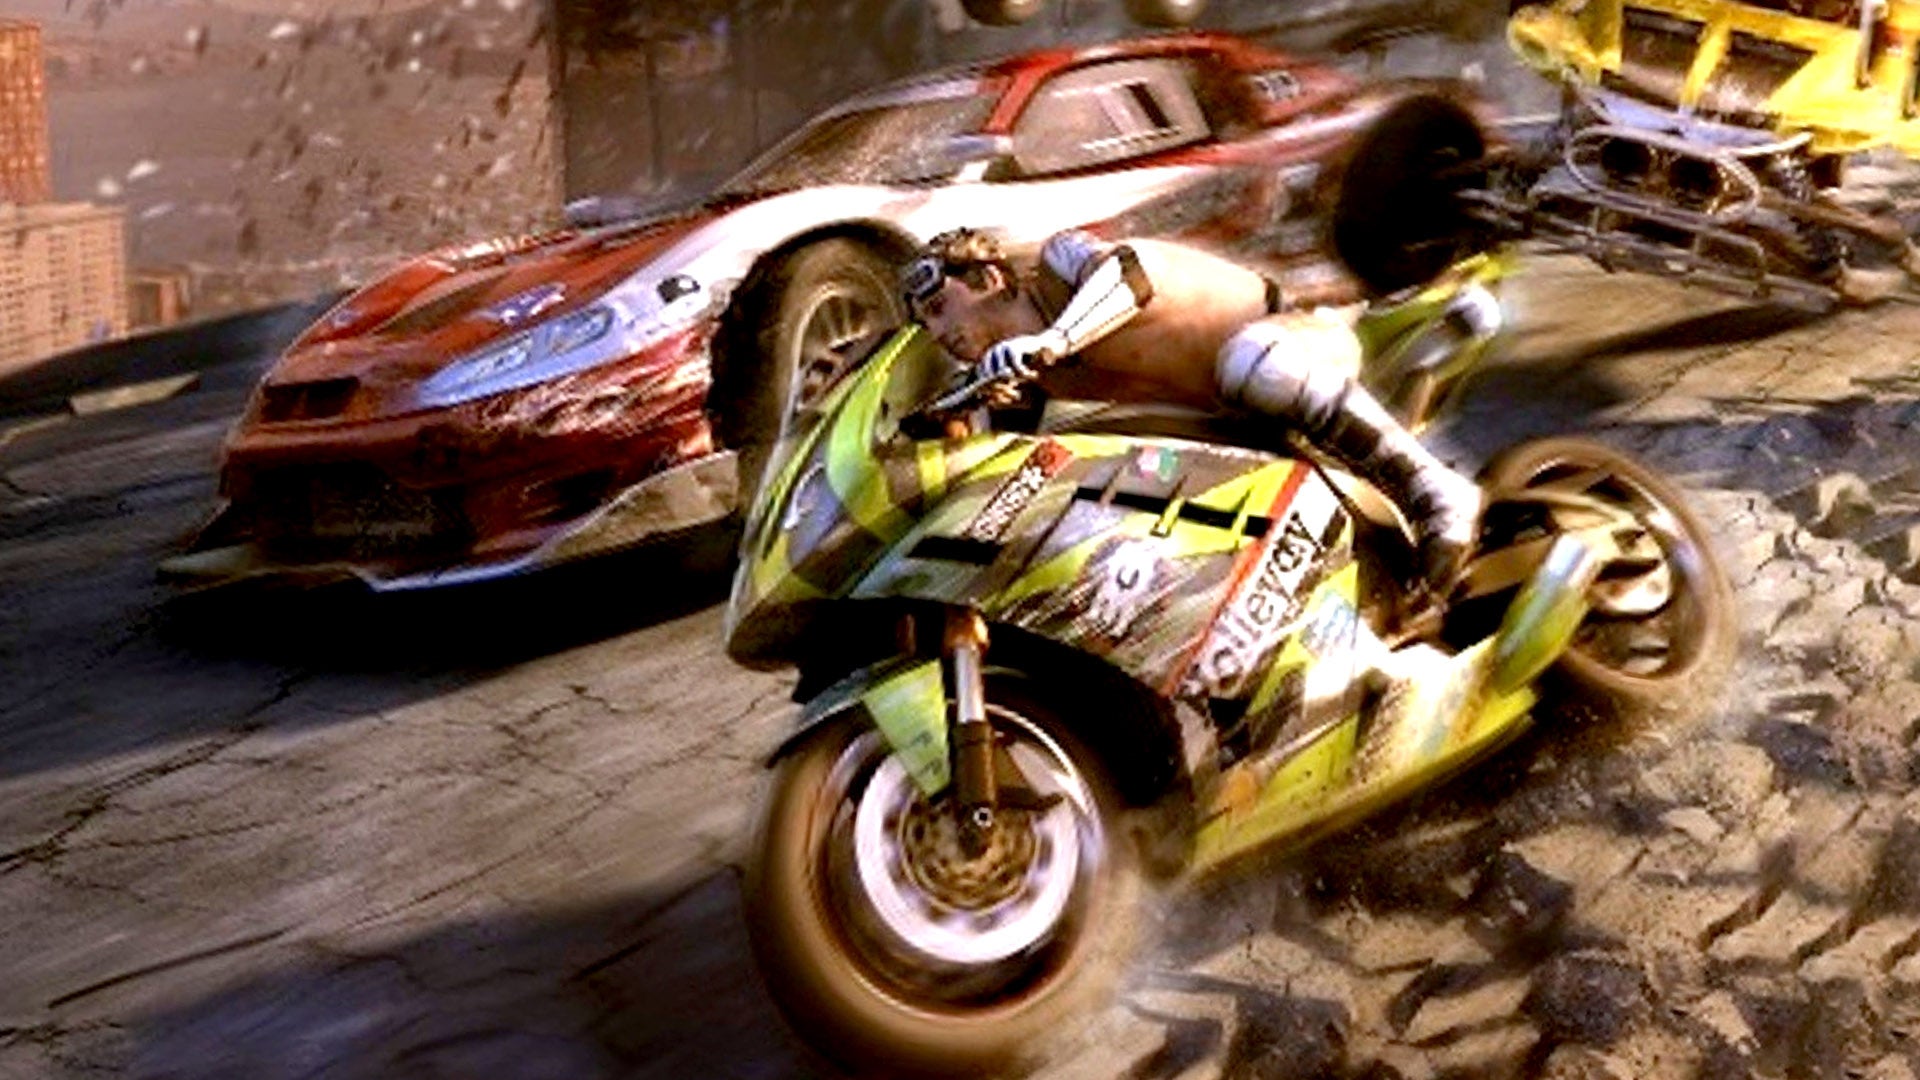 Image for DF Retro: Motorstorm - The Full Series Revisited - Amazing Arcade Mayhem on PS3, PS2, PSP, PS Vita